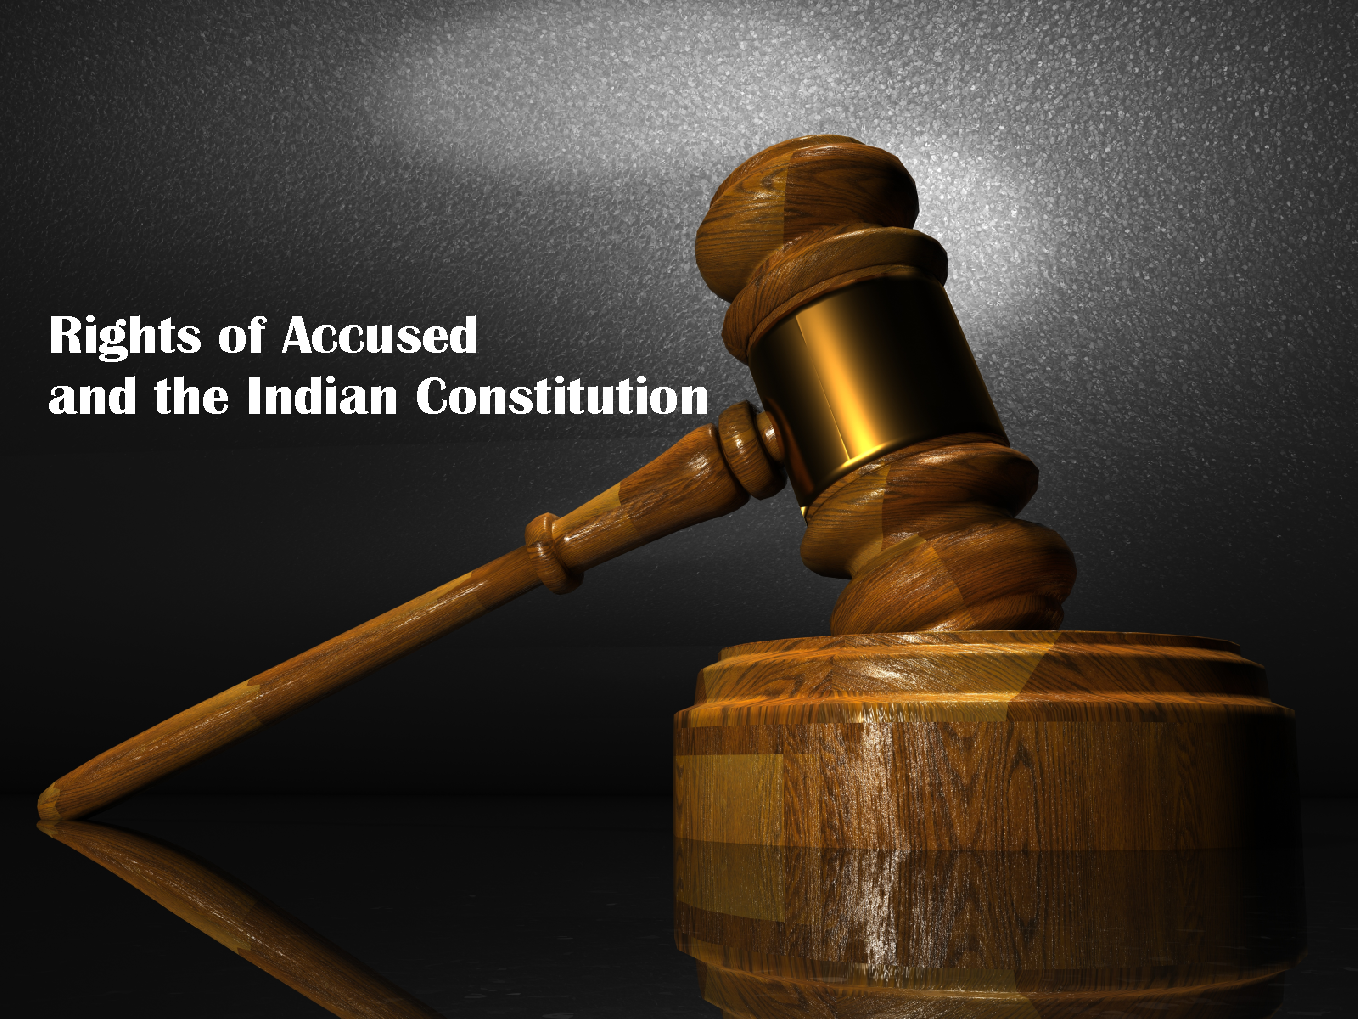 Rights of Accused and the Indian Constitution